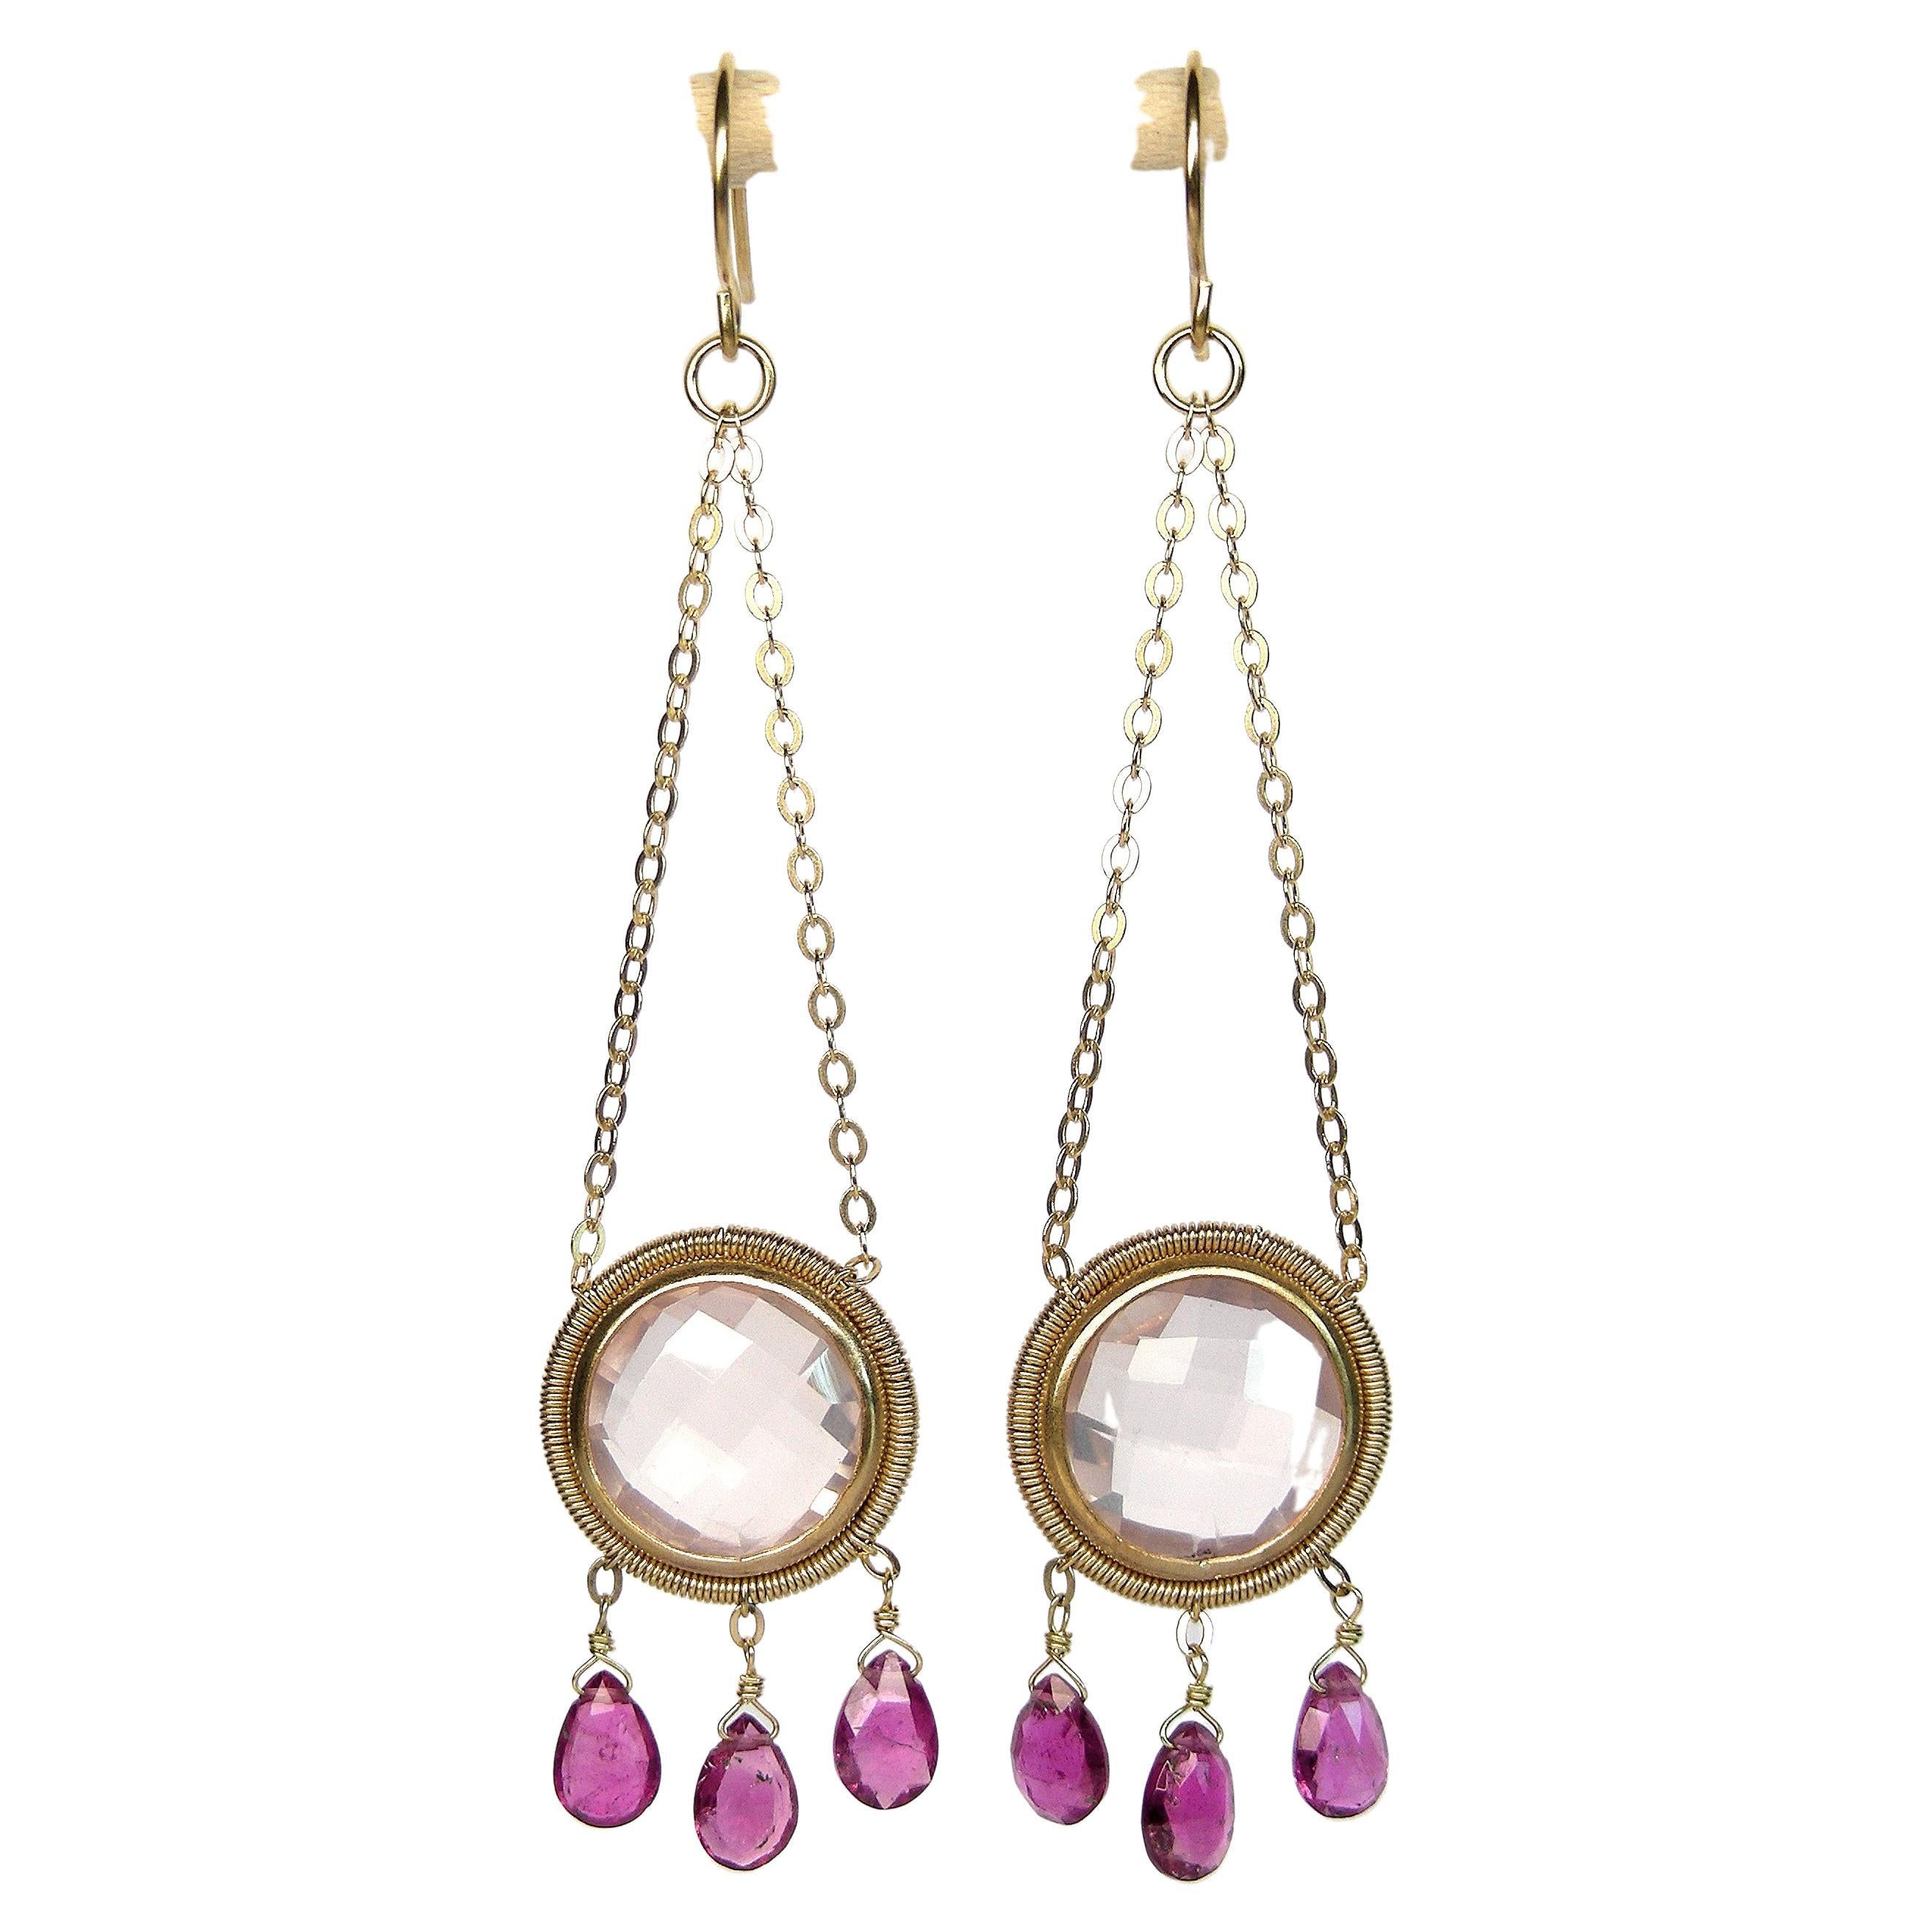 Summer Splash Hoop 18k Gold Earrings with Quartz and Pink Tourmalines For Sale